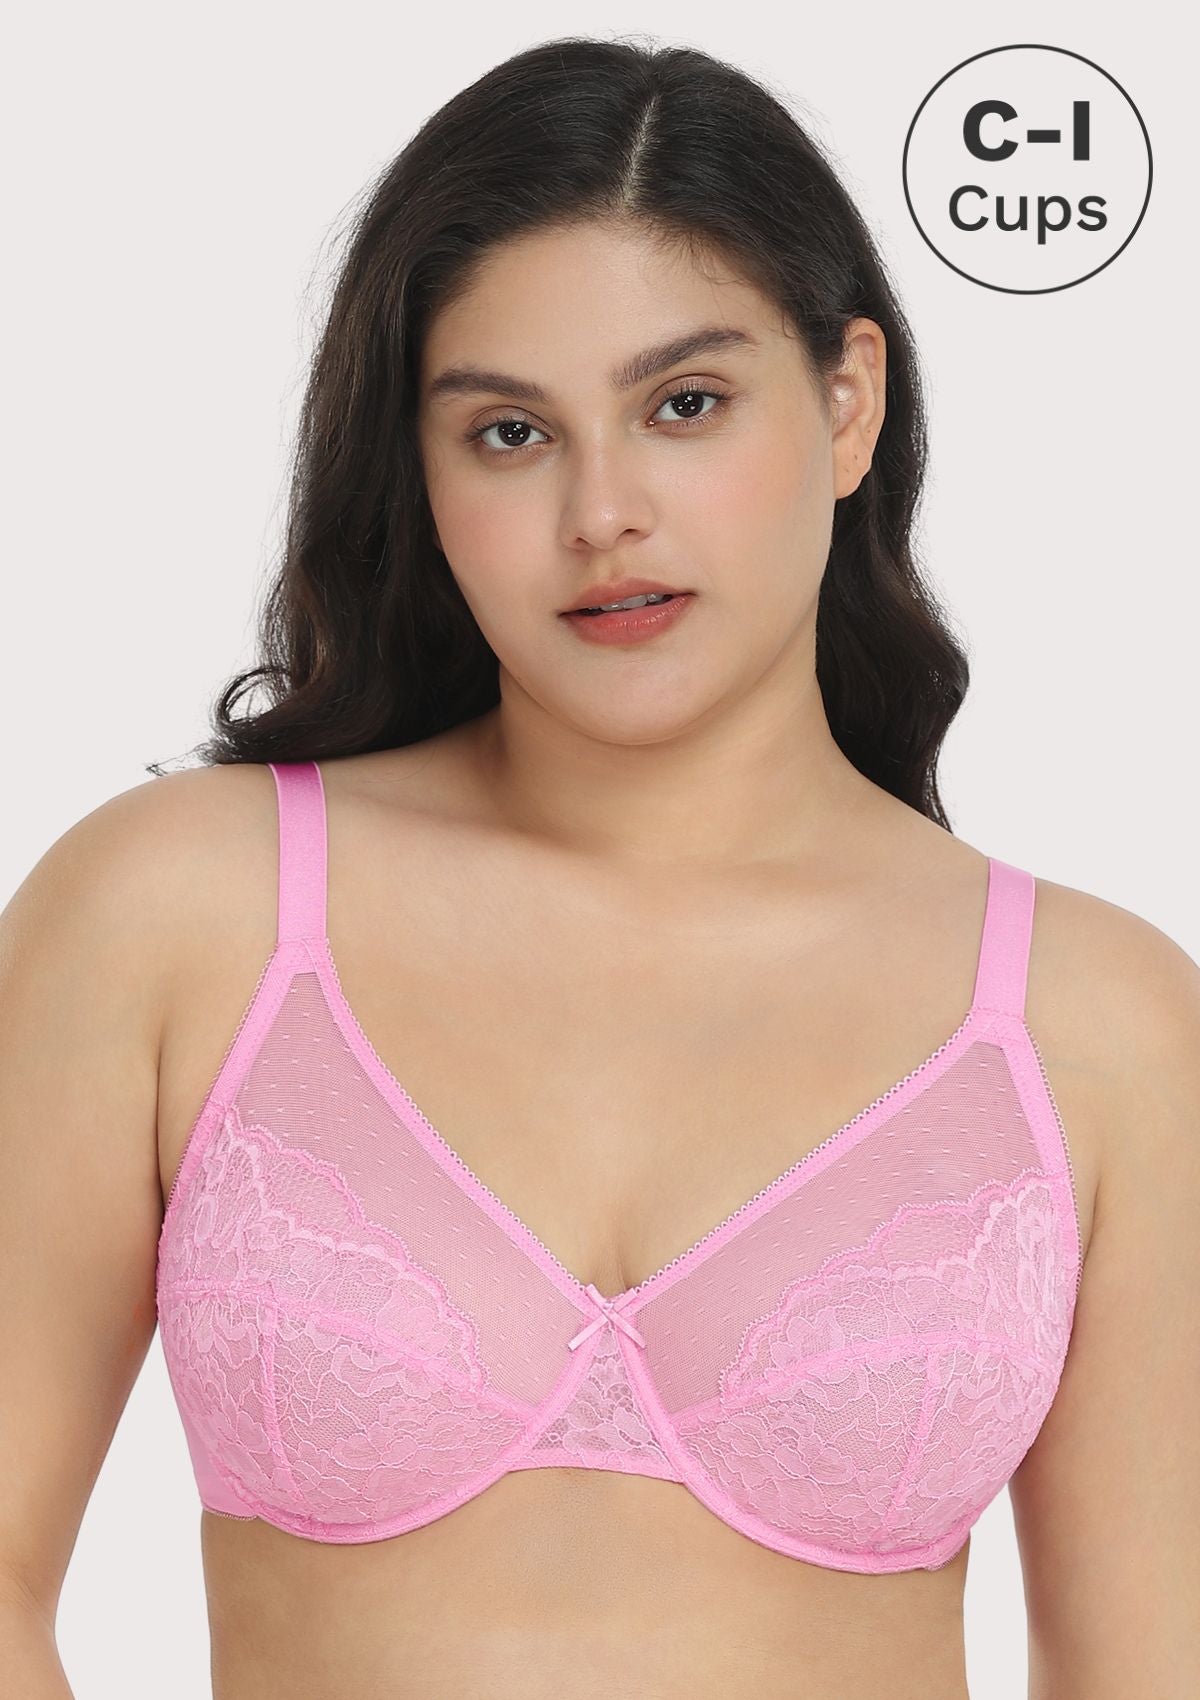 HSIA Enchante Lacy Bra: Comfy Sheer Lace Bra With Lift - Dusty Peach / 46 / C